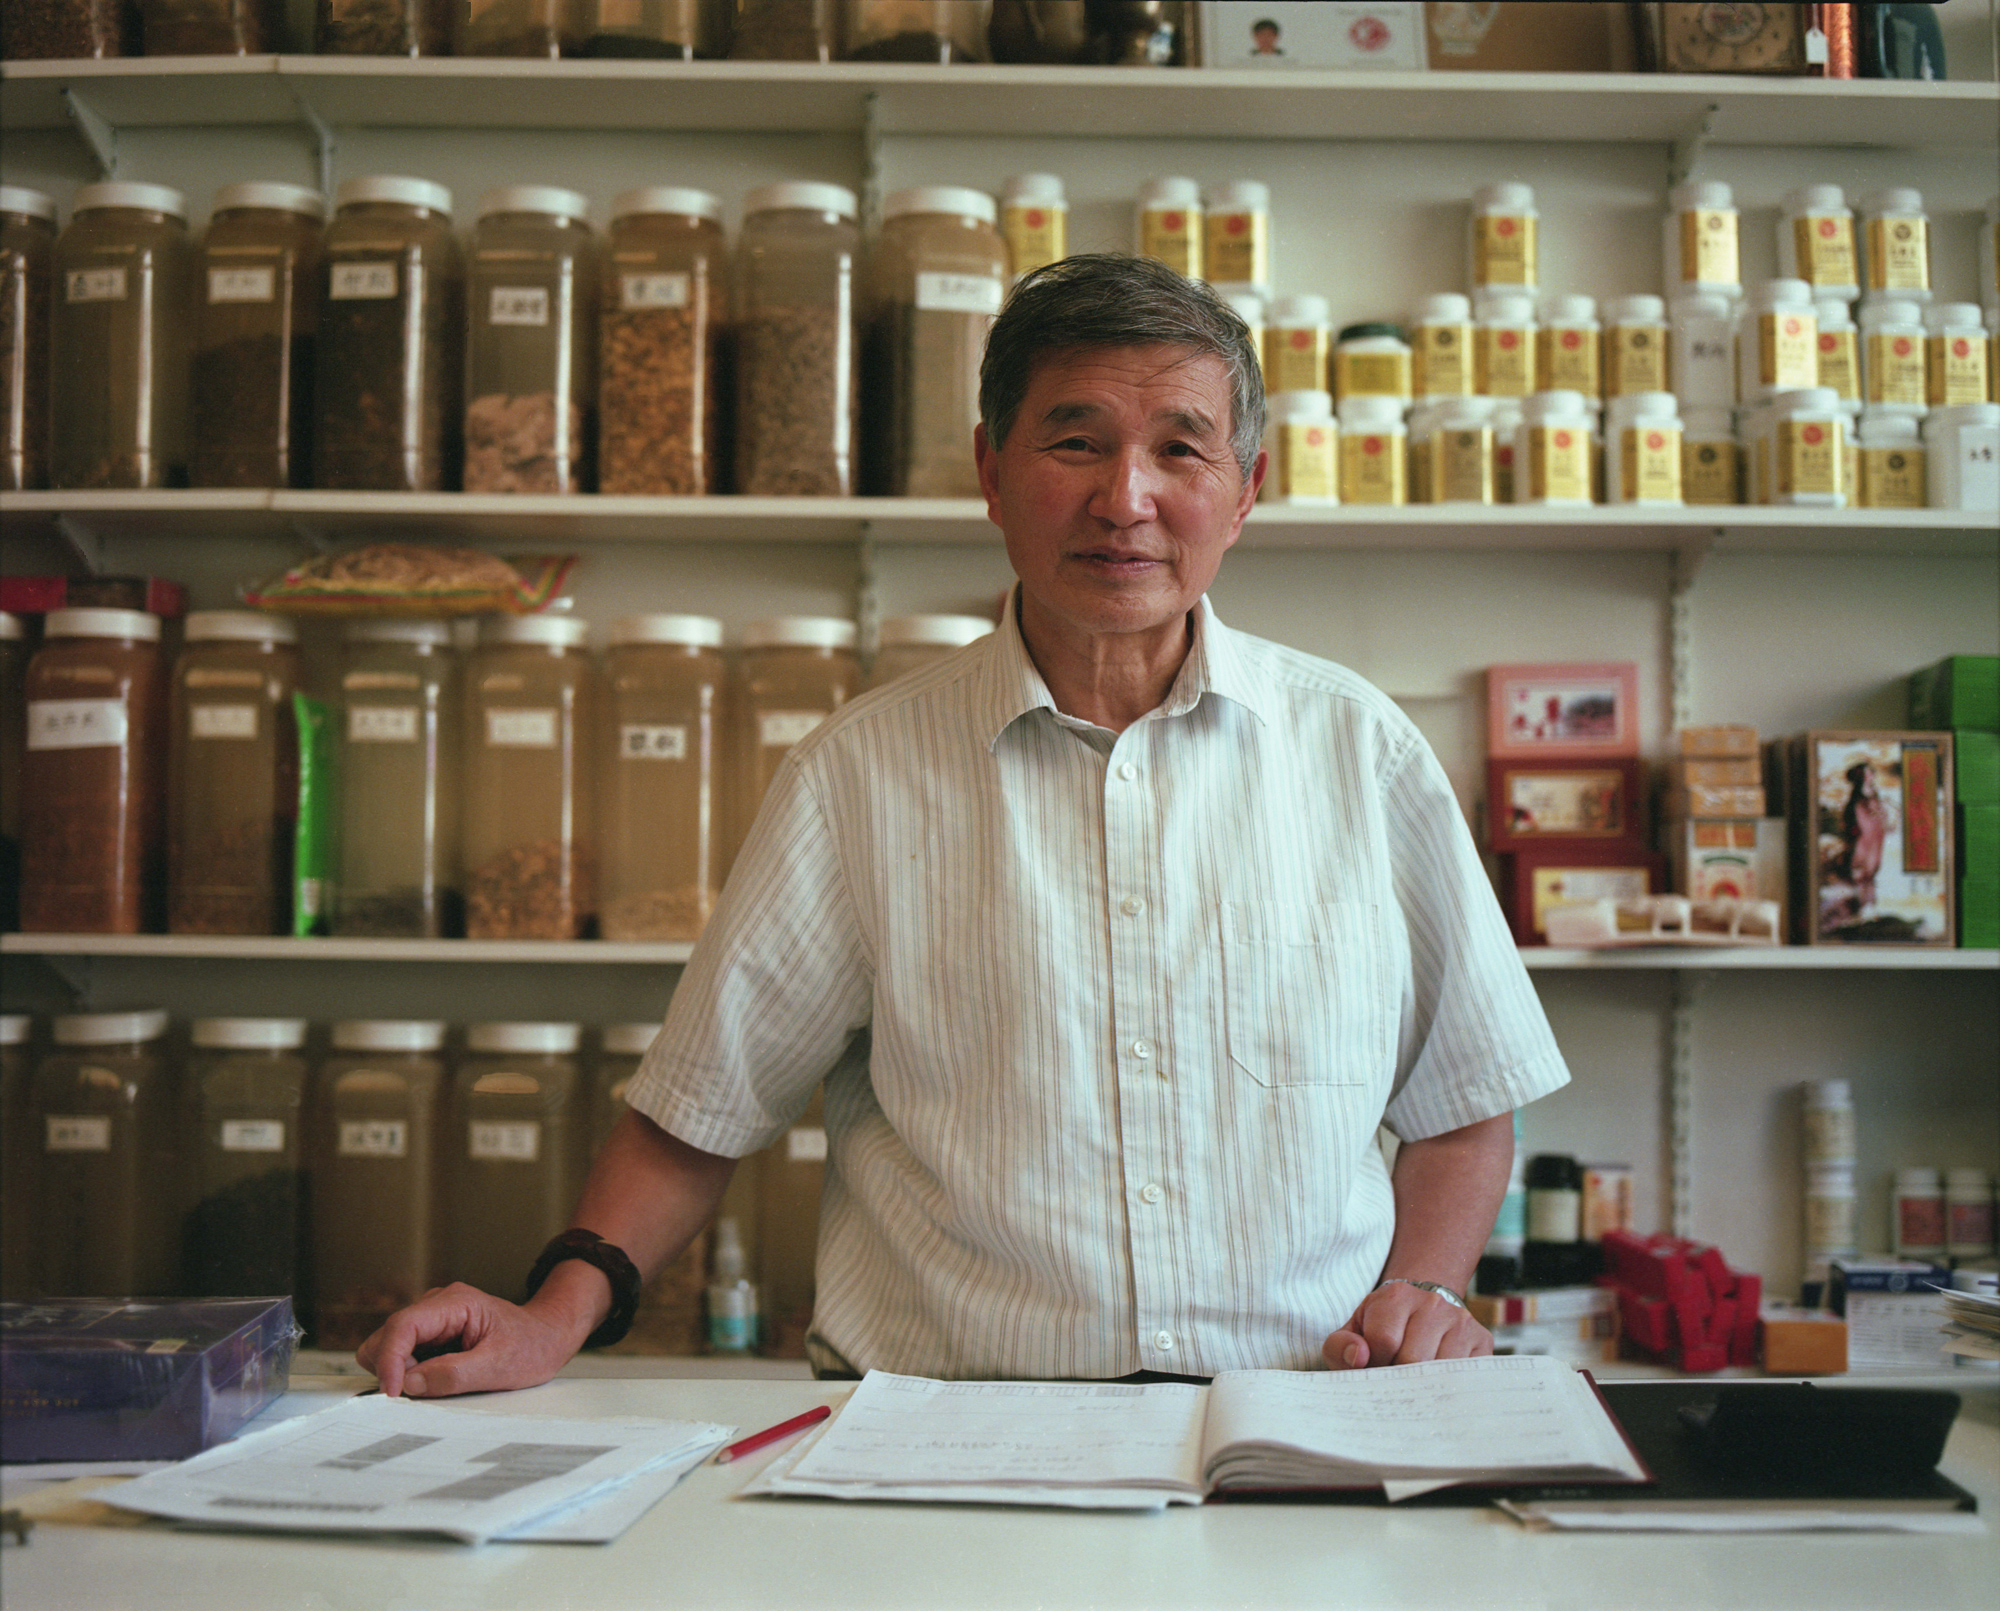 A man standing behind a counter. In front of him, on the counter is a ledger and papers and behind him 3 shelves are stacked with herbal products labelled in Chinese. 